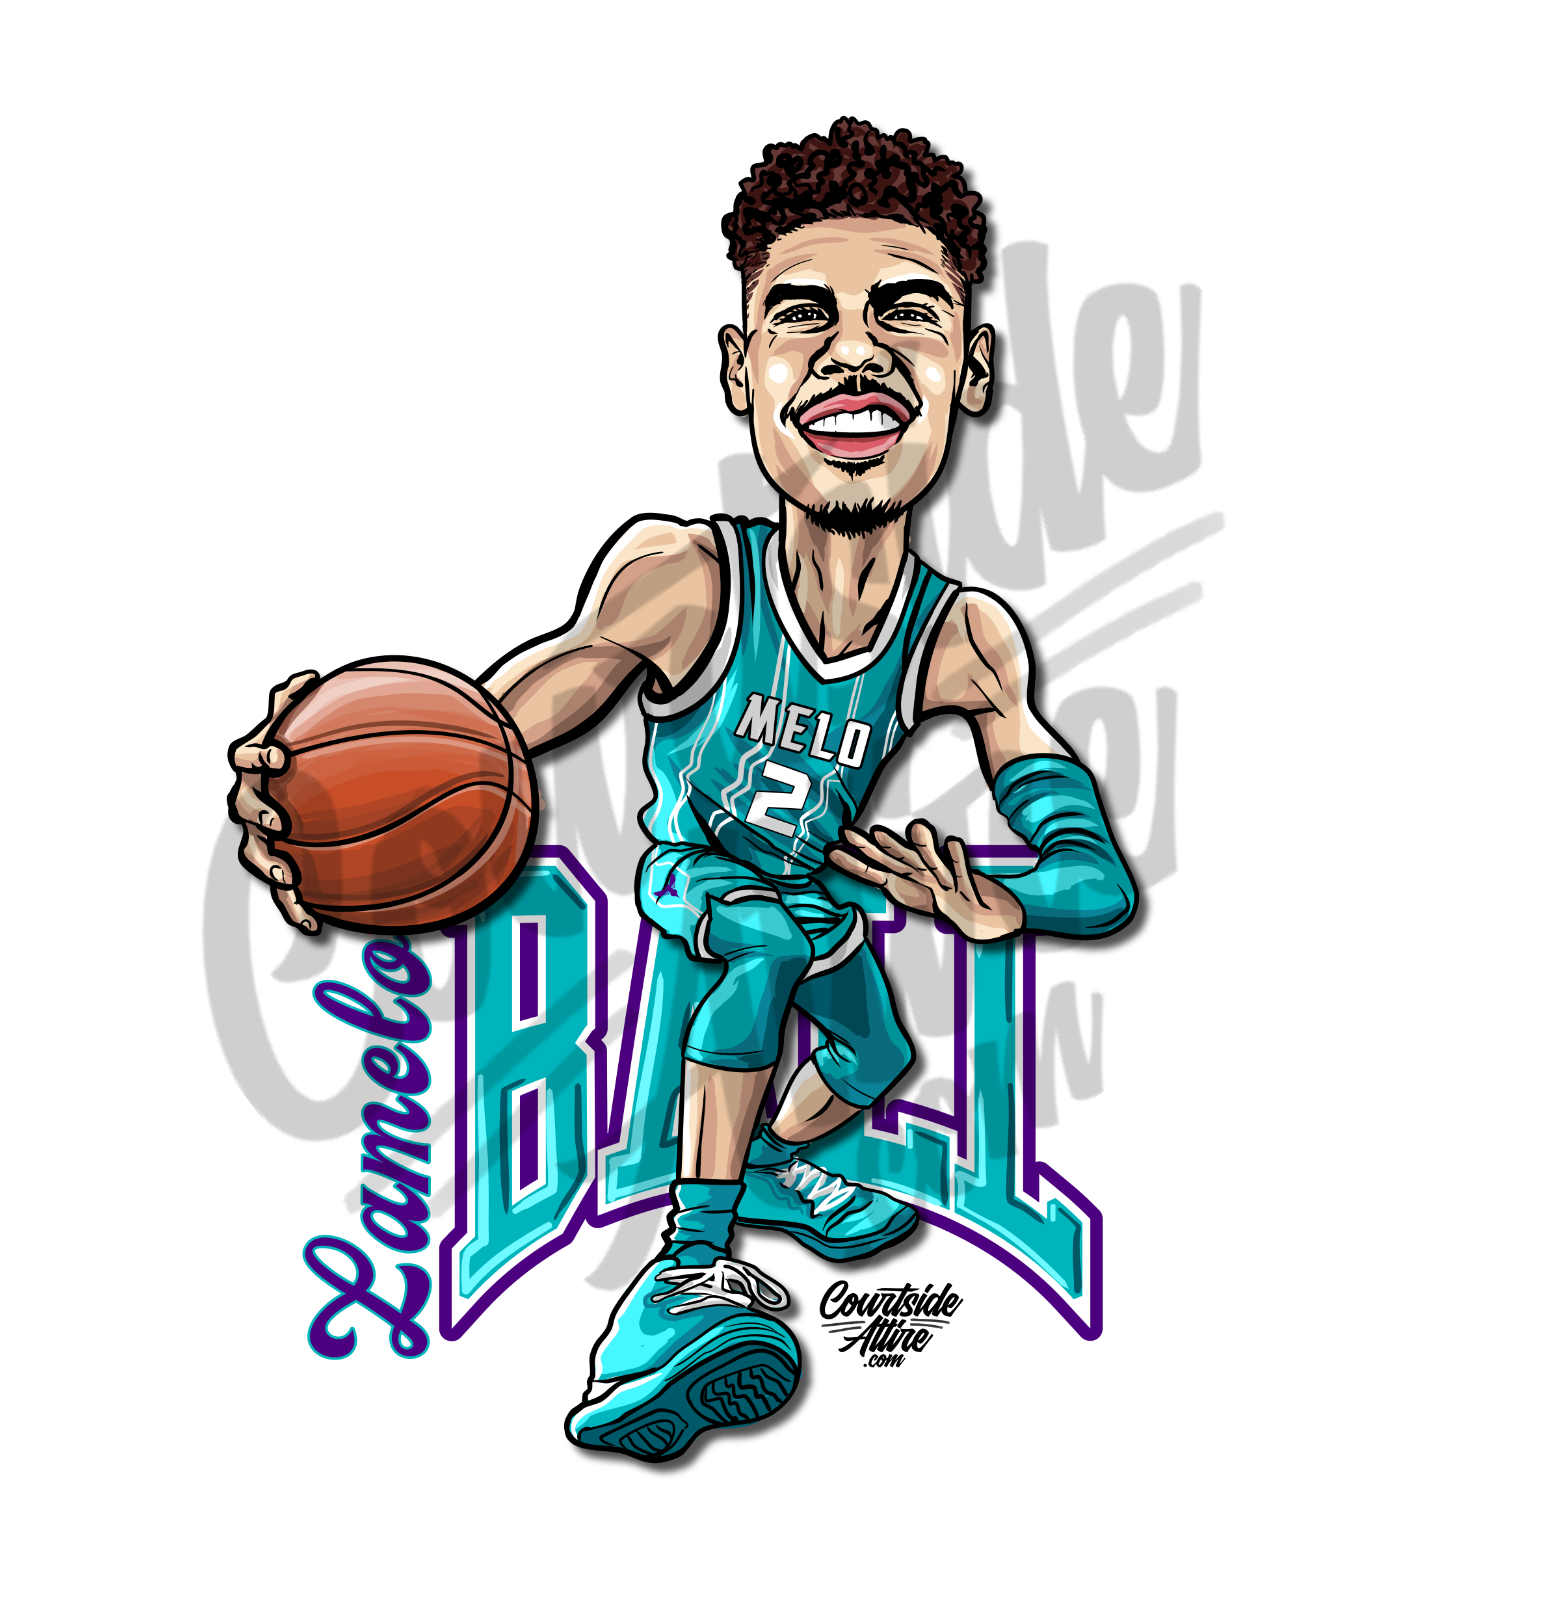 LAMELO BALL CHARLOTTE HORNETS BUZZ CITY CITY EDITION JERSEY - Prime Reps